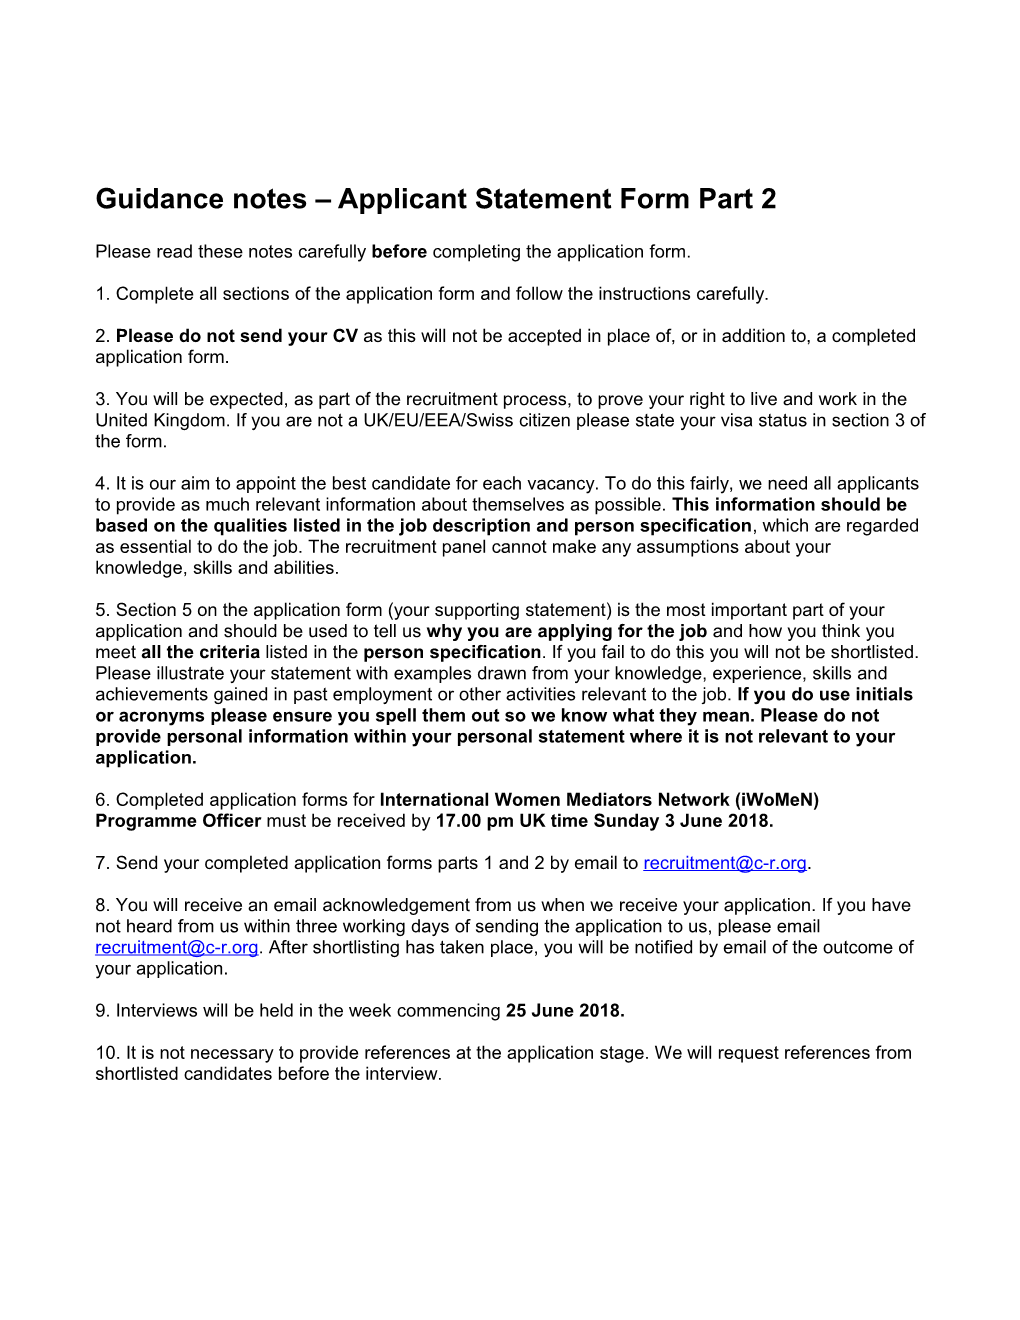 Guidance Notes Applicant Statement Form Part 2